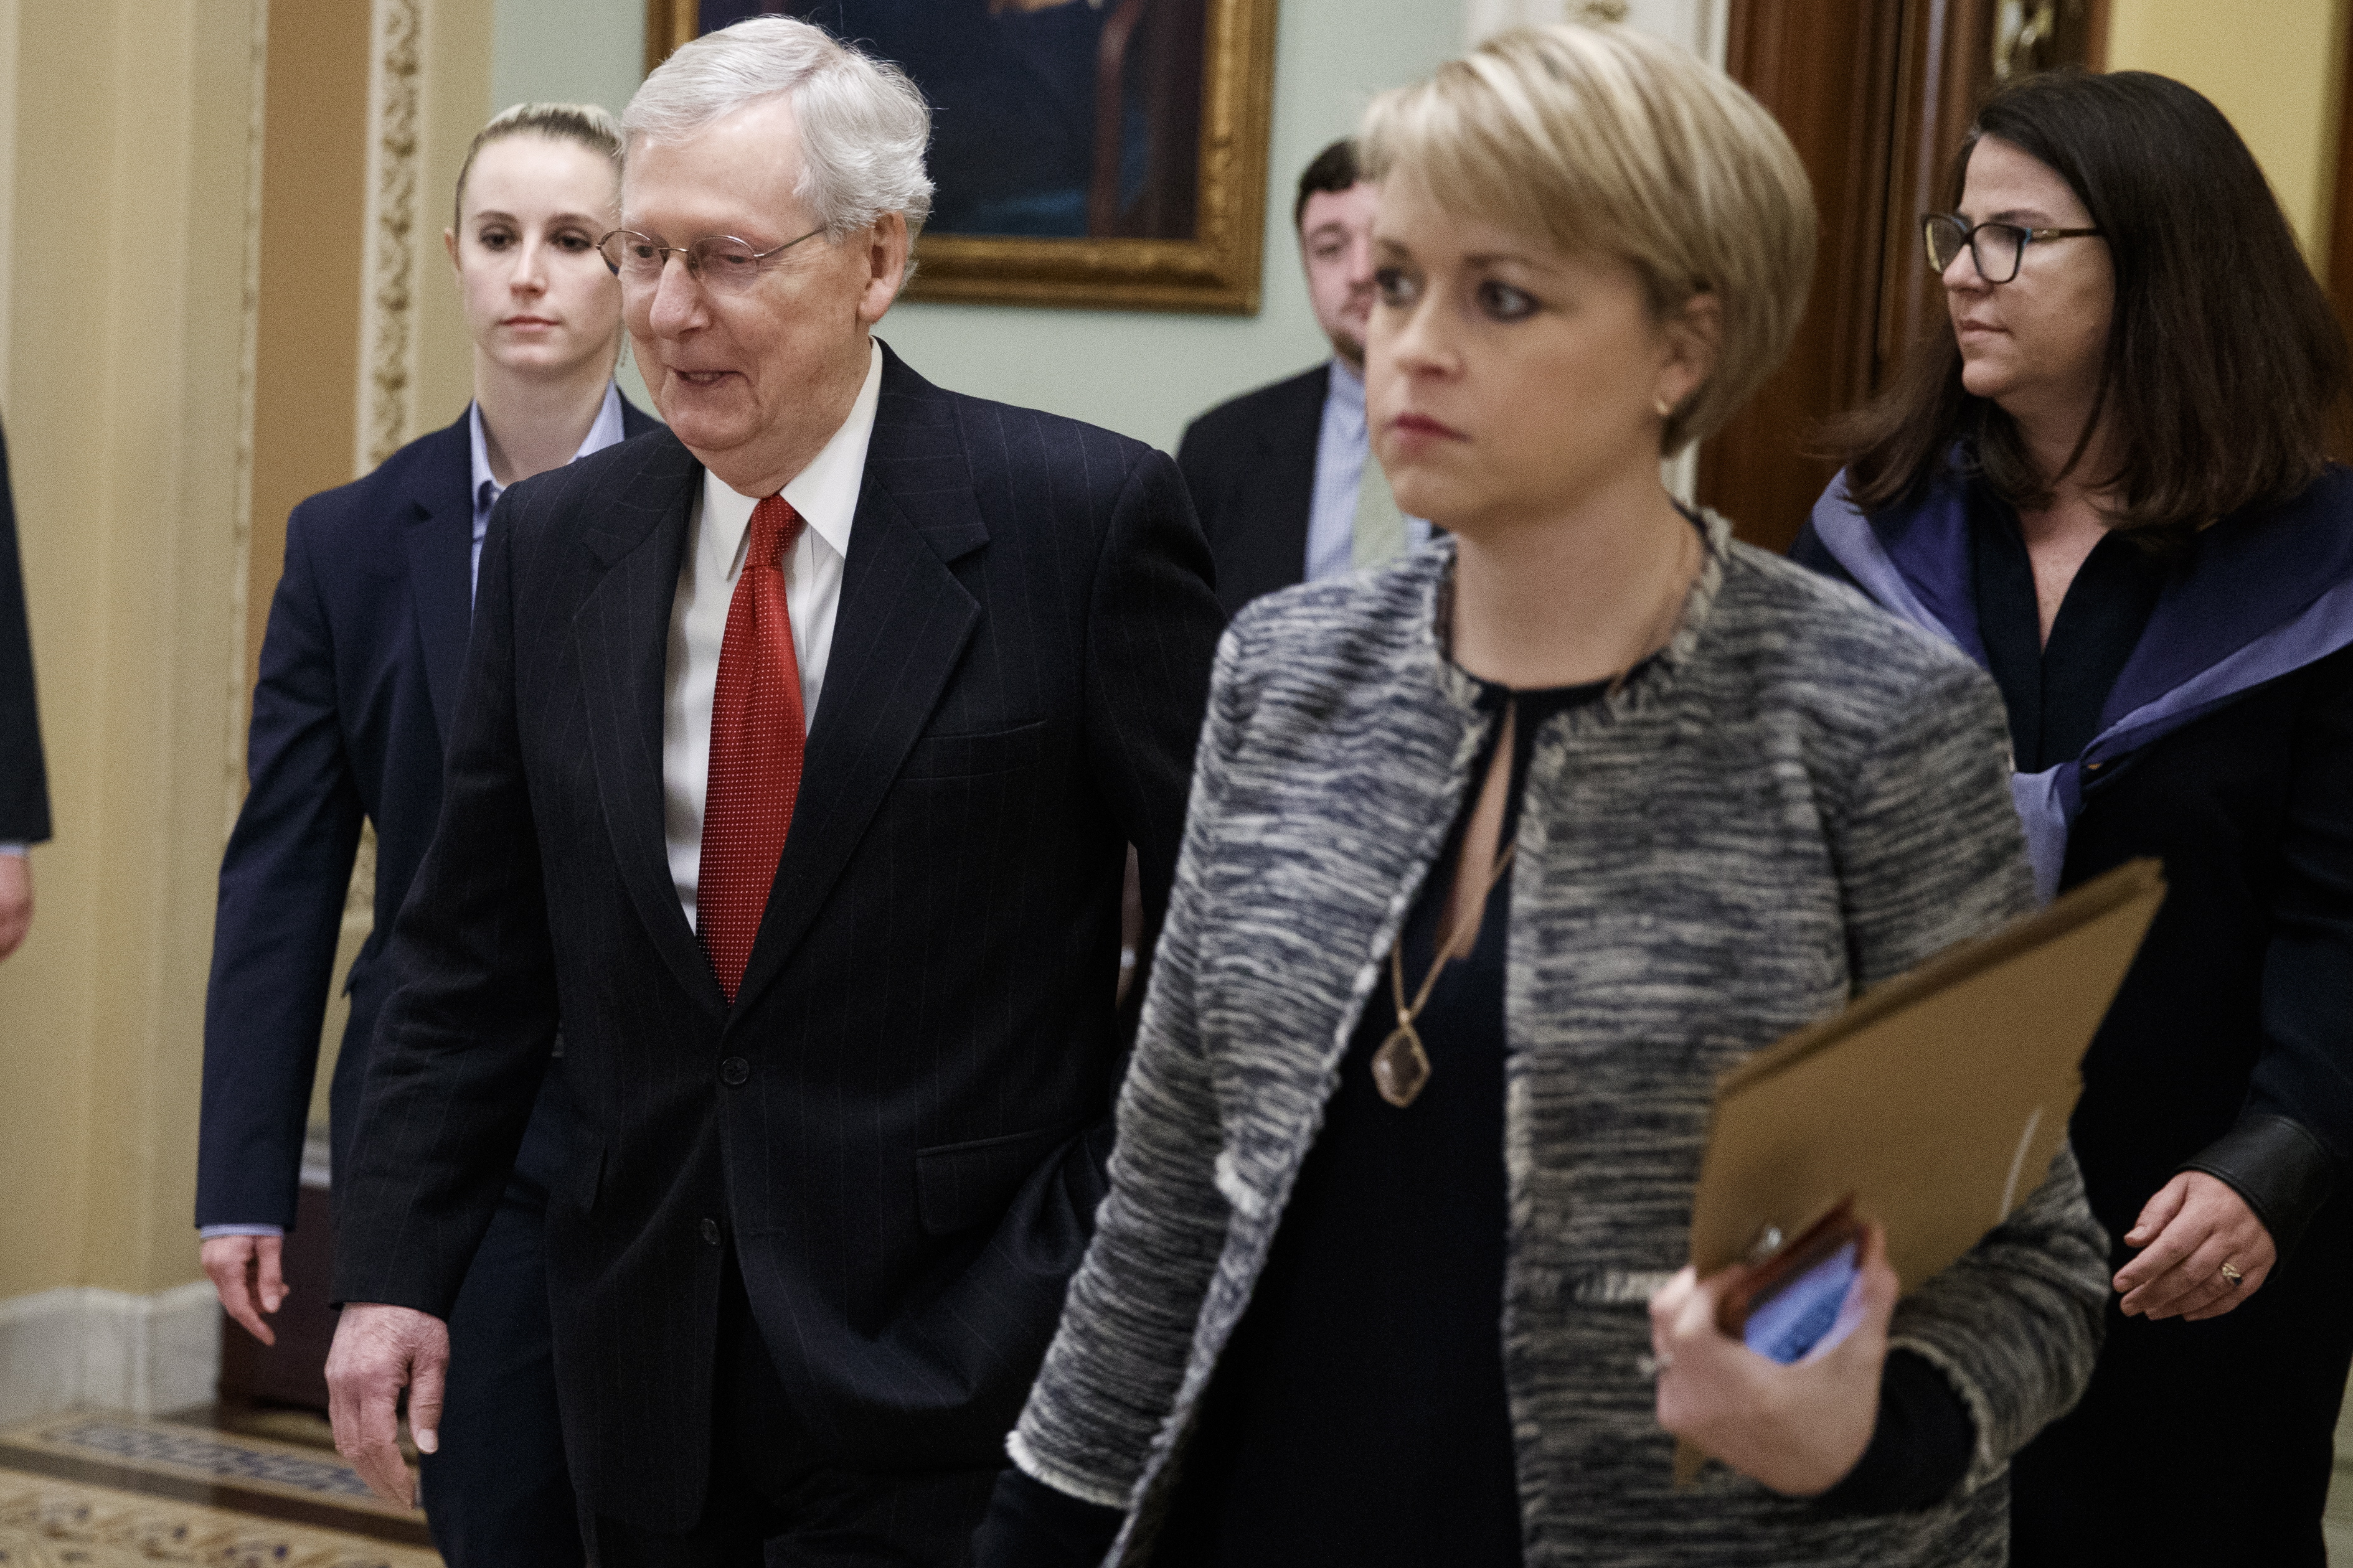 epa07316792 Senate Majority Leader Mitch McConnell (2-L) walks off the Senate Floor after a pair of votes to reopen the government in the US Capitol in Washington, DC, USA, 24 January 2019. The Senate defeated 2 bills, one Republican and one Democratic, to reopen the government now in its 34th day of a partial shutdown.  EPA/SHAWN THEW